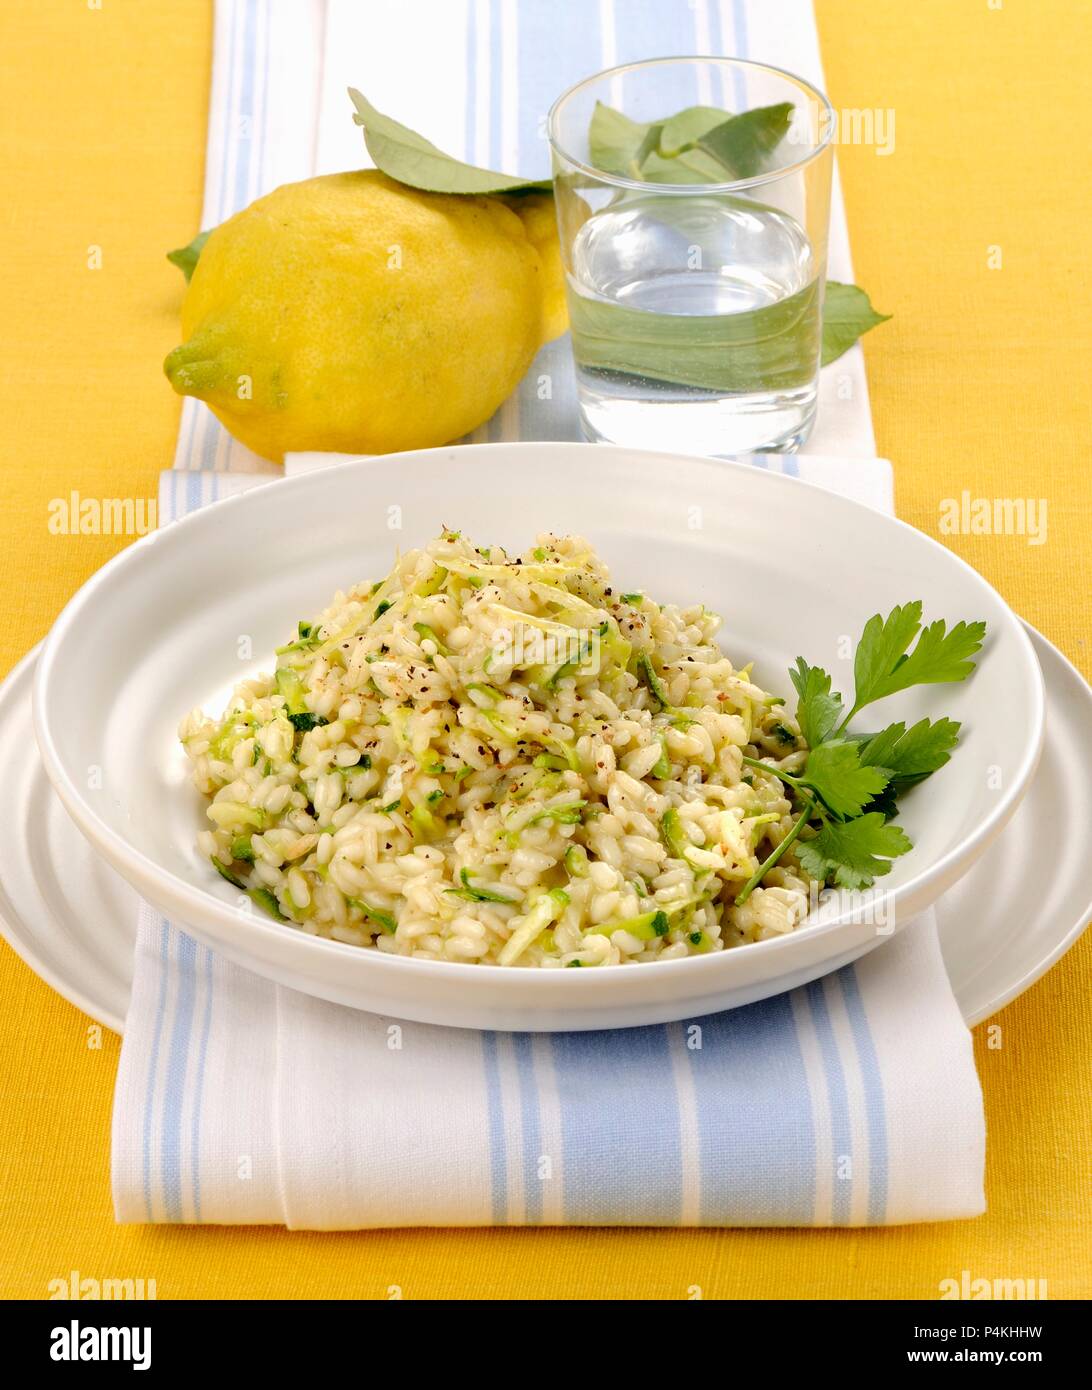 Risotto alle zucchine (courgette risotto with lemon, Italy) Stock Photo